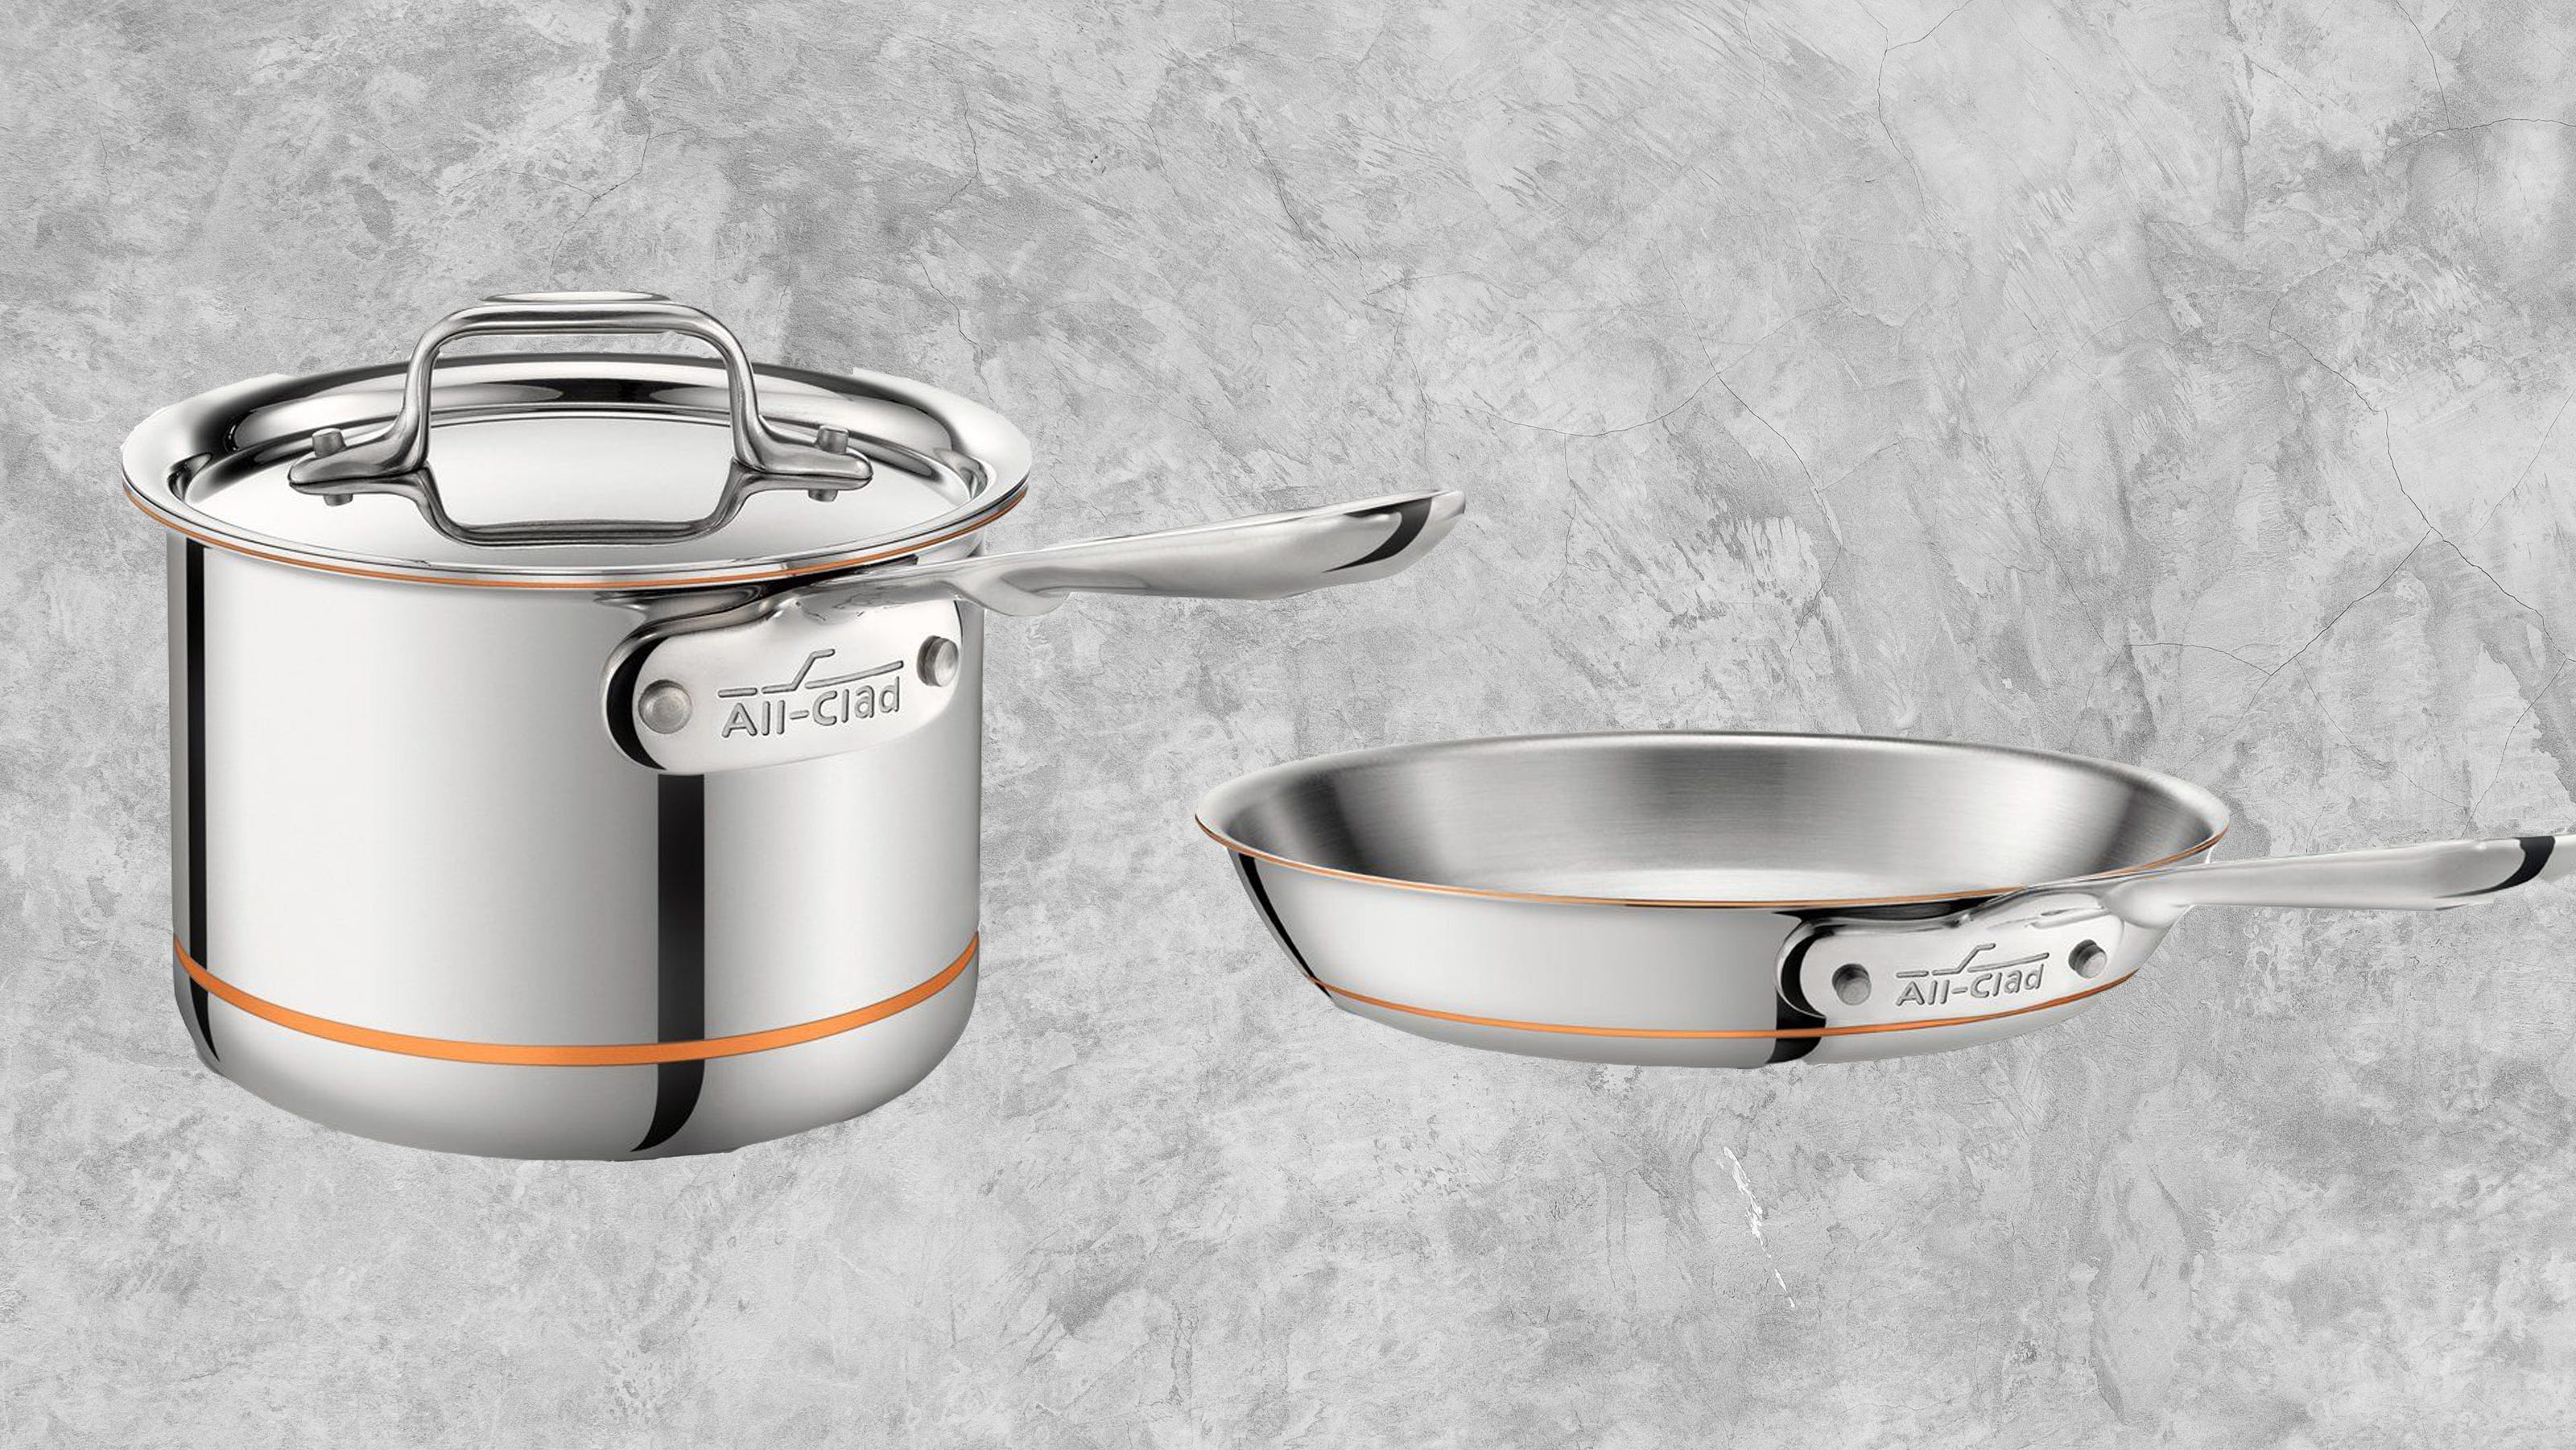 AllClad cookware Get up to 87 off at the VIP Factory Seconds sale